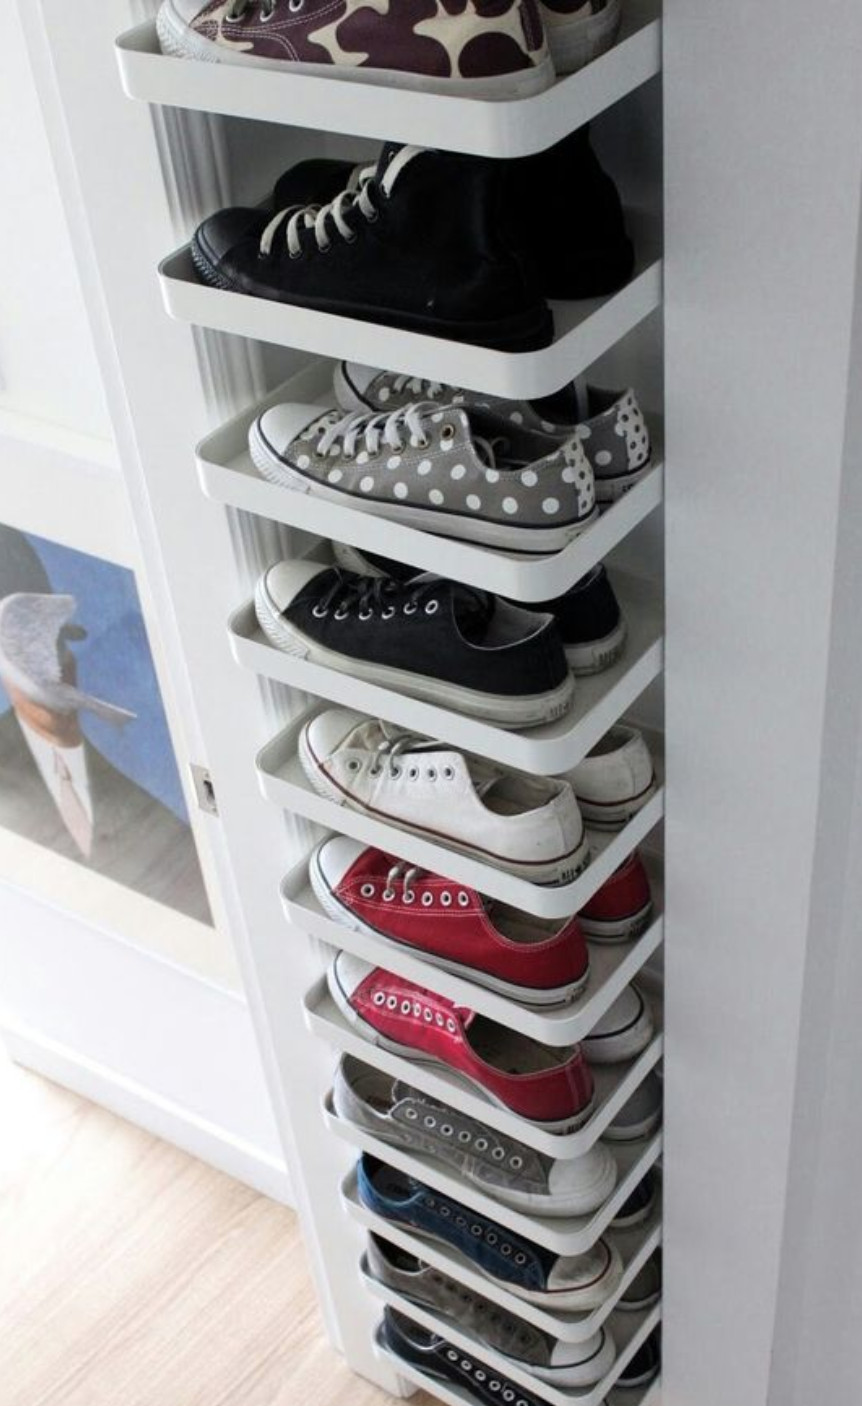 DIY Shoe Rack For Small Closet
 The Best DIY Inspiration That Will Keep Your Room